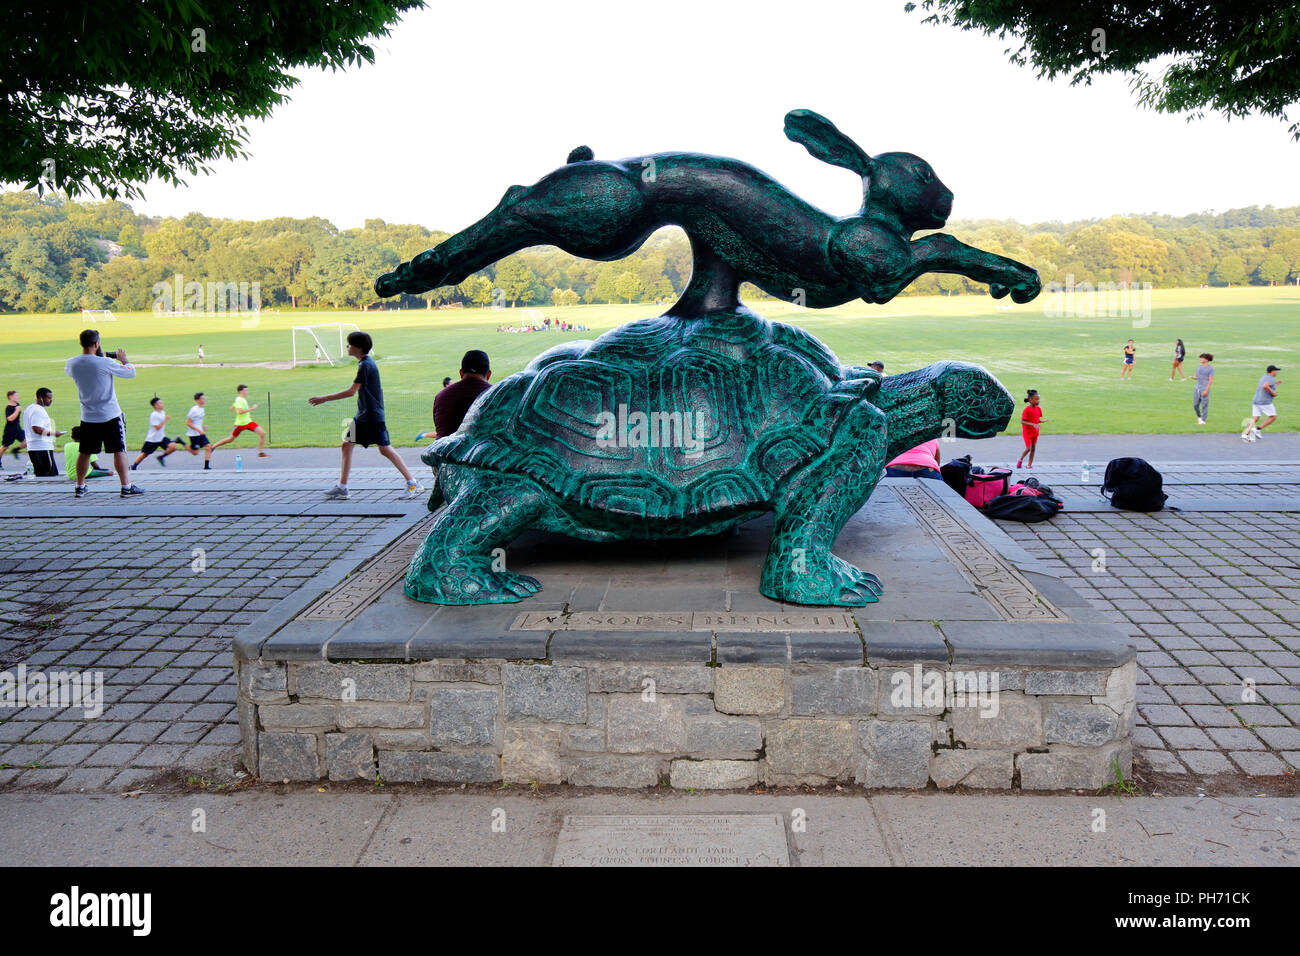 Runners near the Tortoise and Hare statue at Van Cortlandt Park Stock Photo  - Alamy